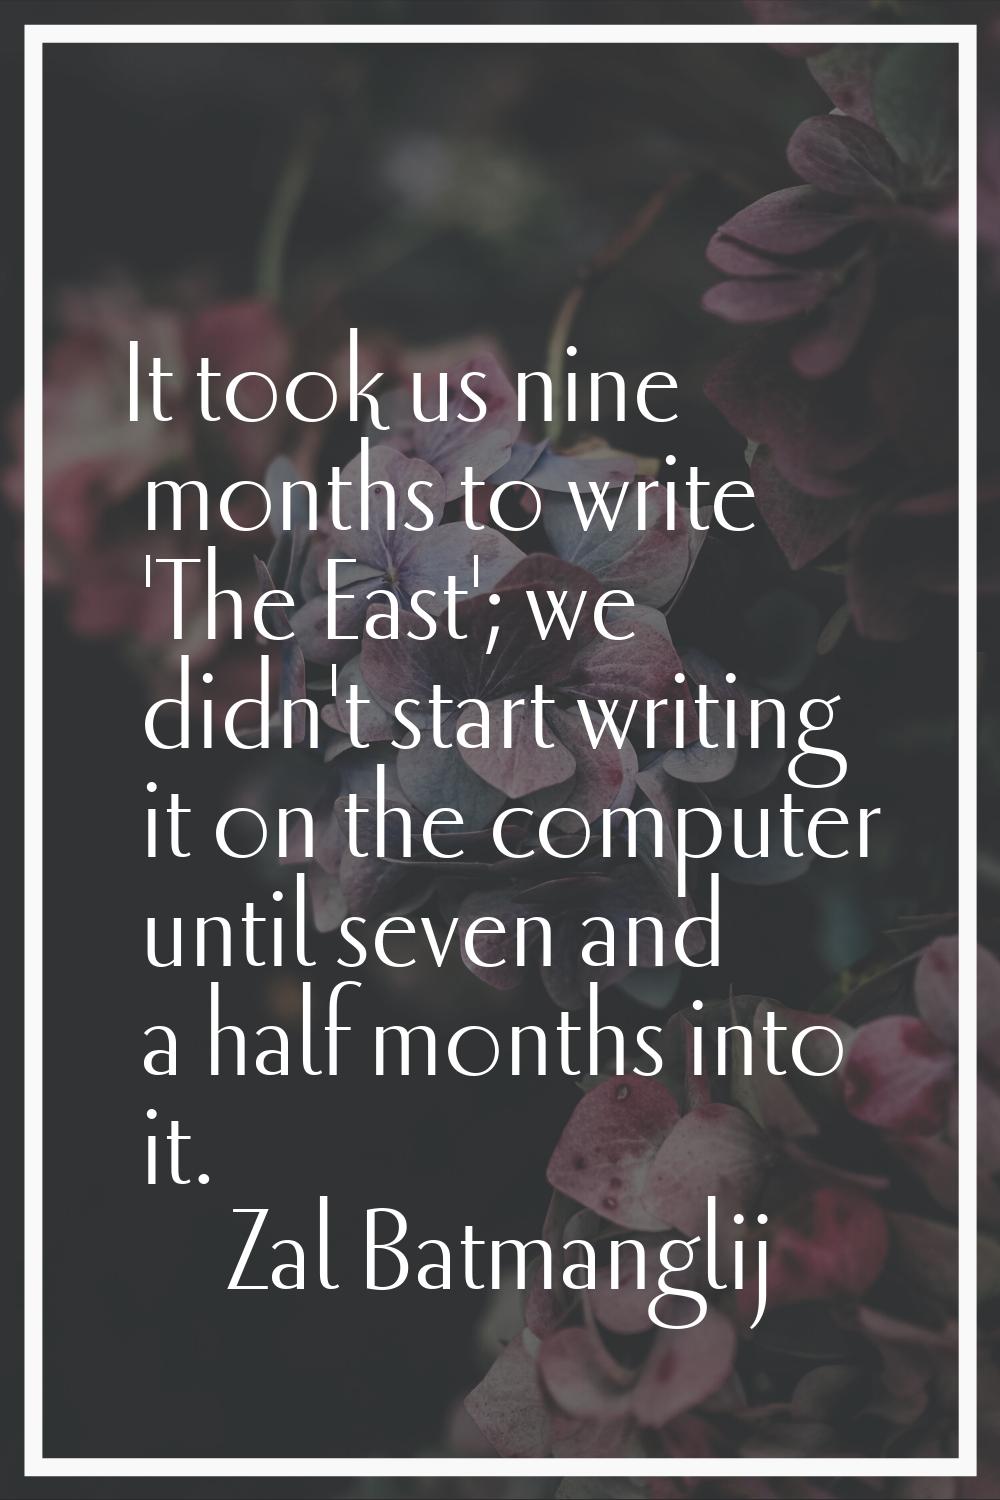 It took us nine months to write 'The East'; we didn't start writing it on the computer until seven 